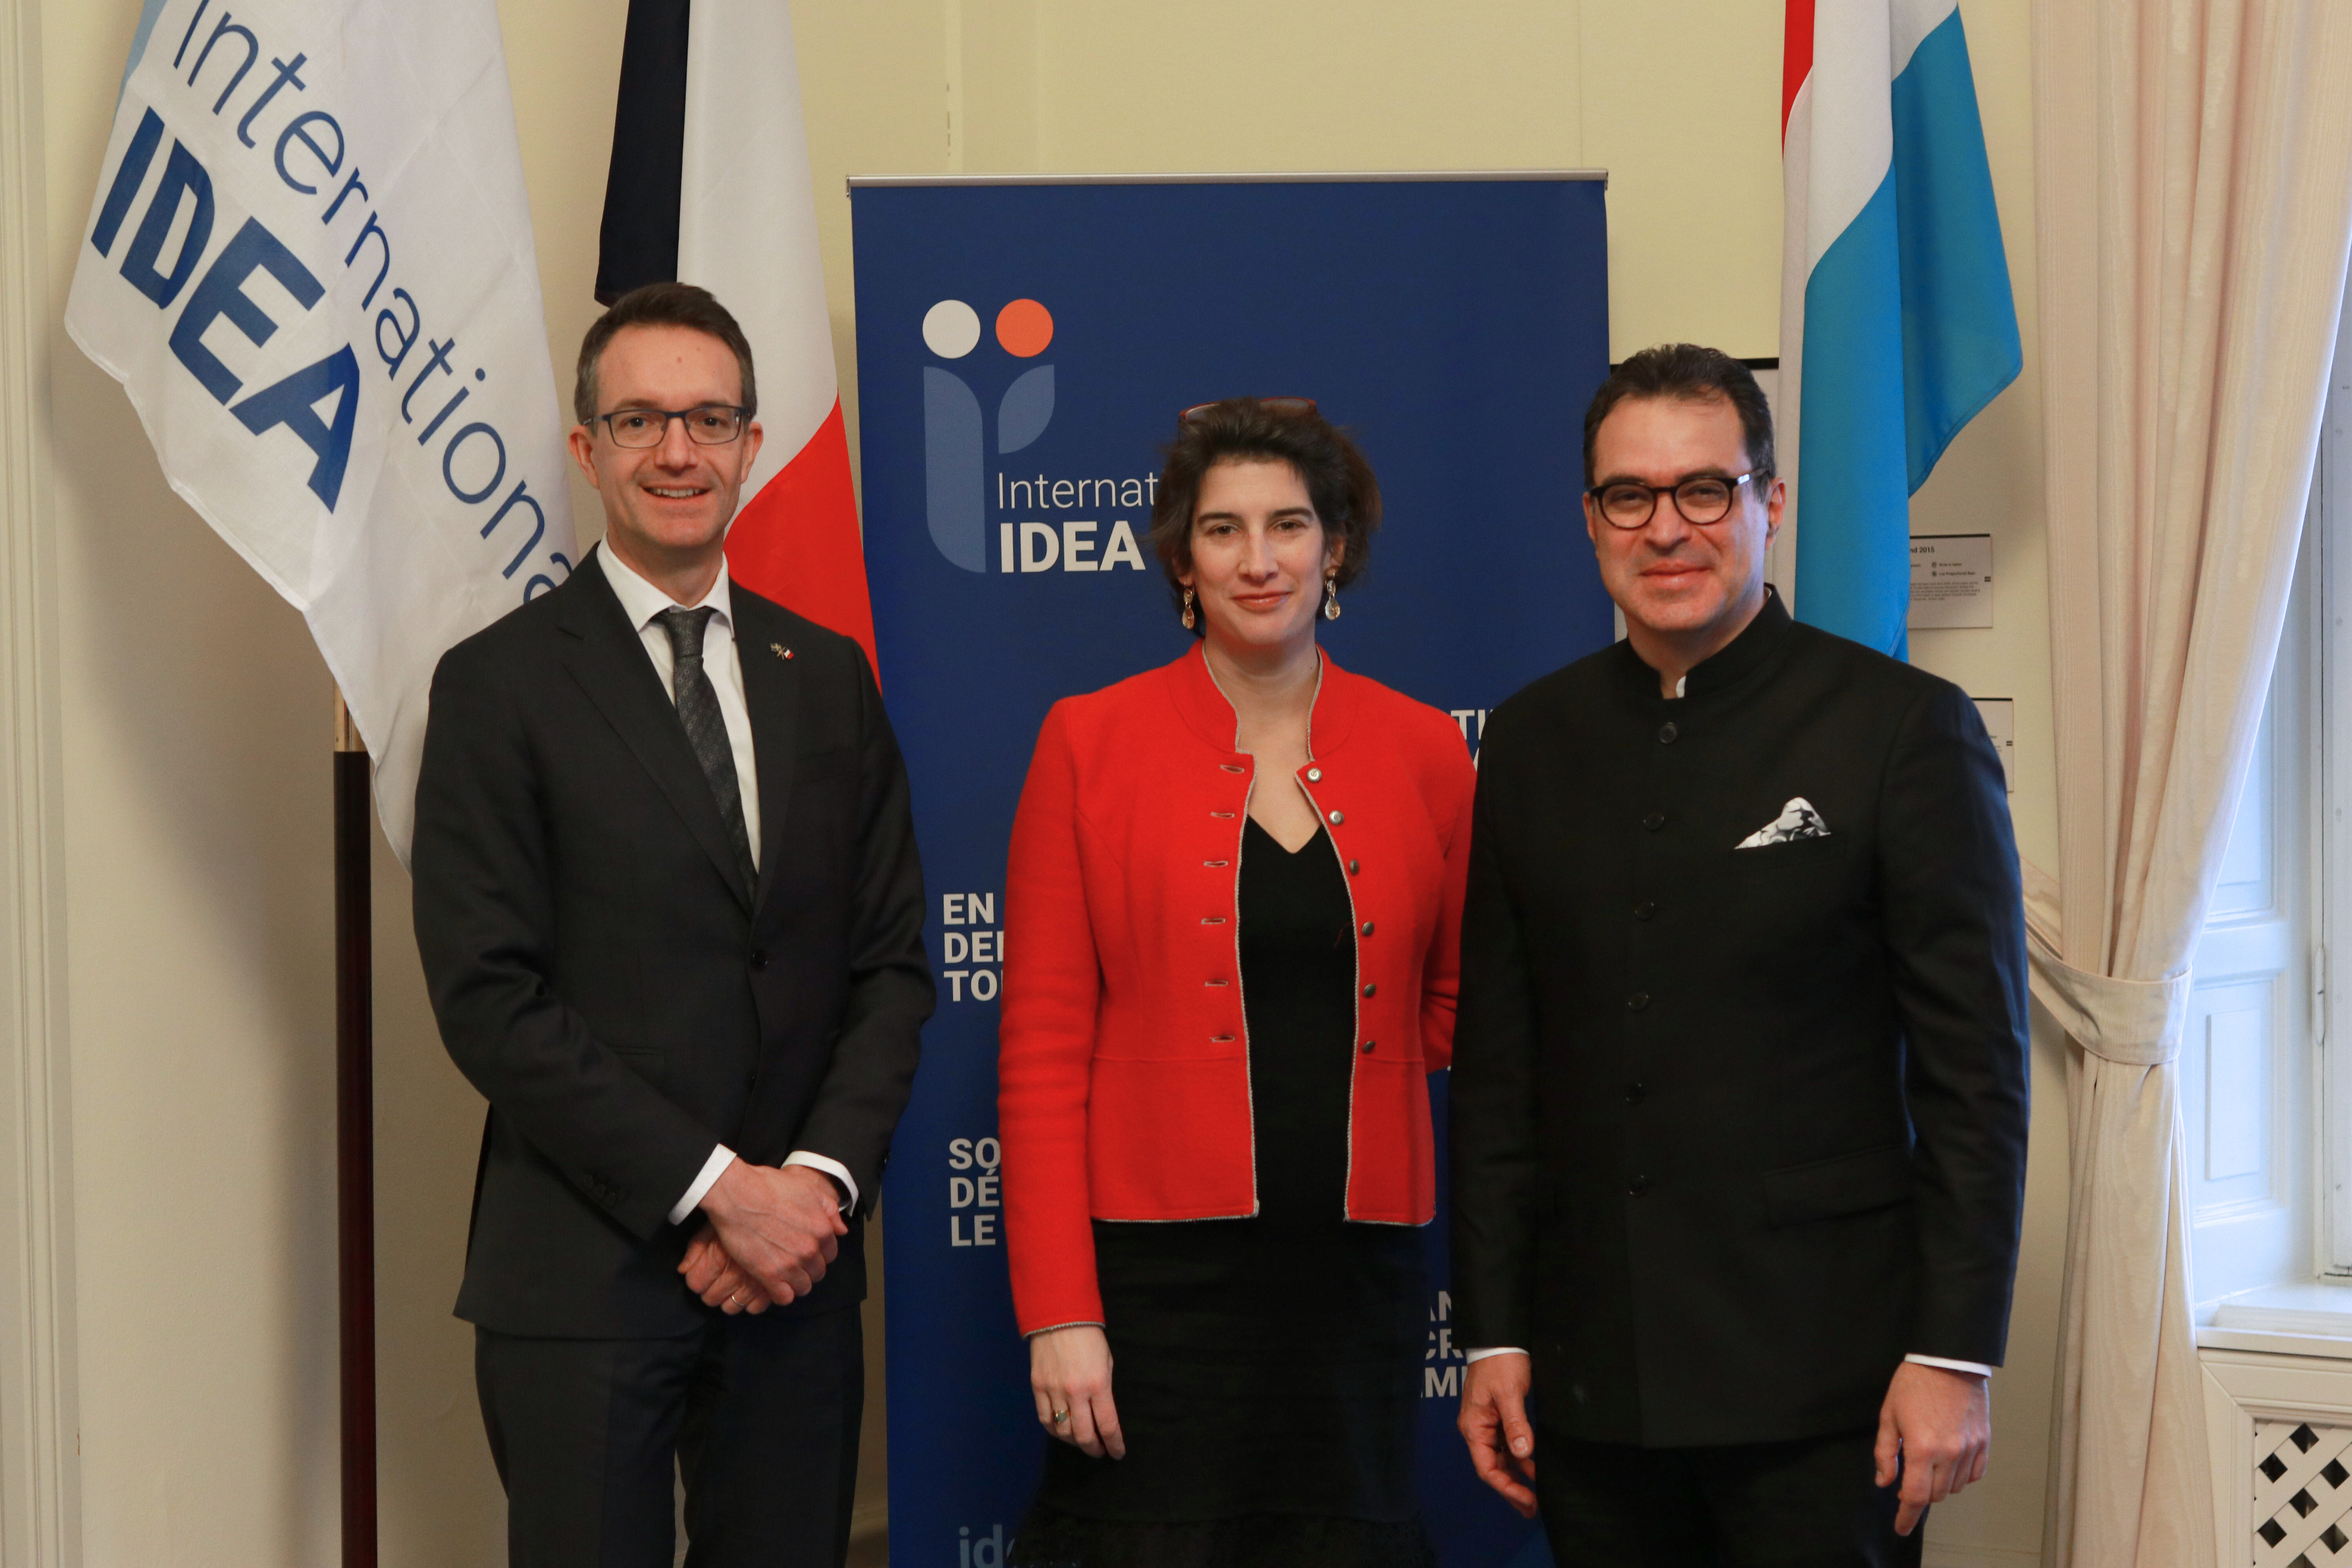 The photo shows, from left to right: French Ambassador to Sweden Etienne Le Harivel de Gonneville, Clemence Weulersse, Head of the Department for Democratic Governance in France  Secretary-General Kevin Casas-Zamora, International IDEA.